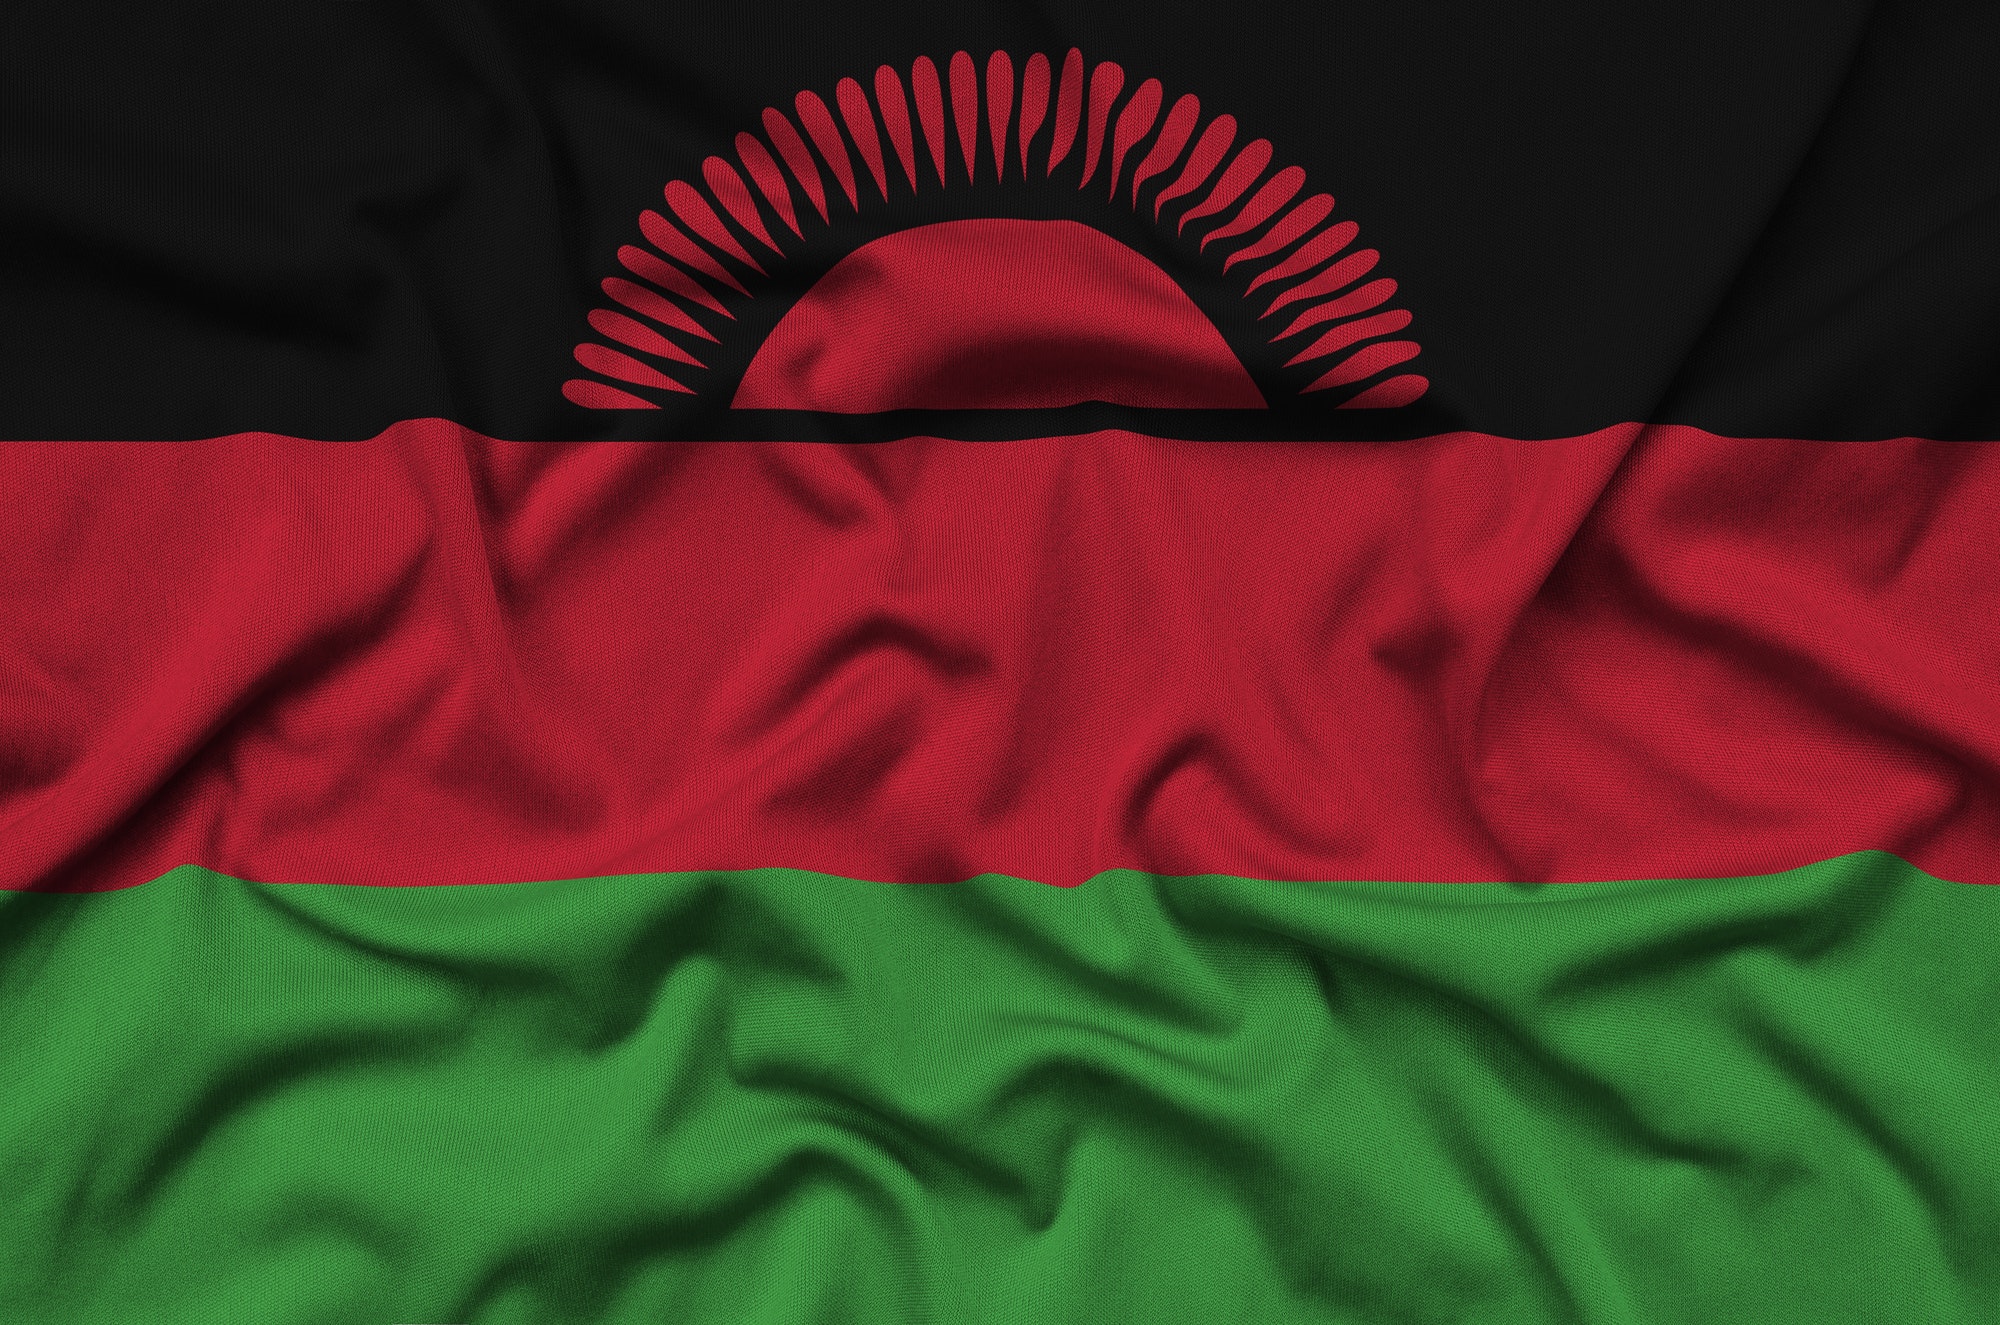 Malawi flag is depicted on a sports cloth fabric with many folds. Sport team waving banner